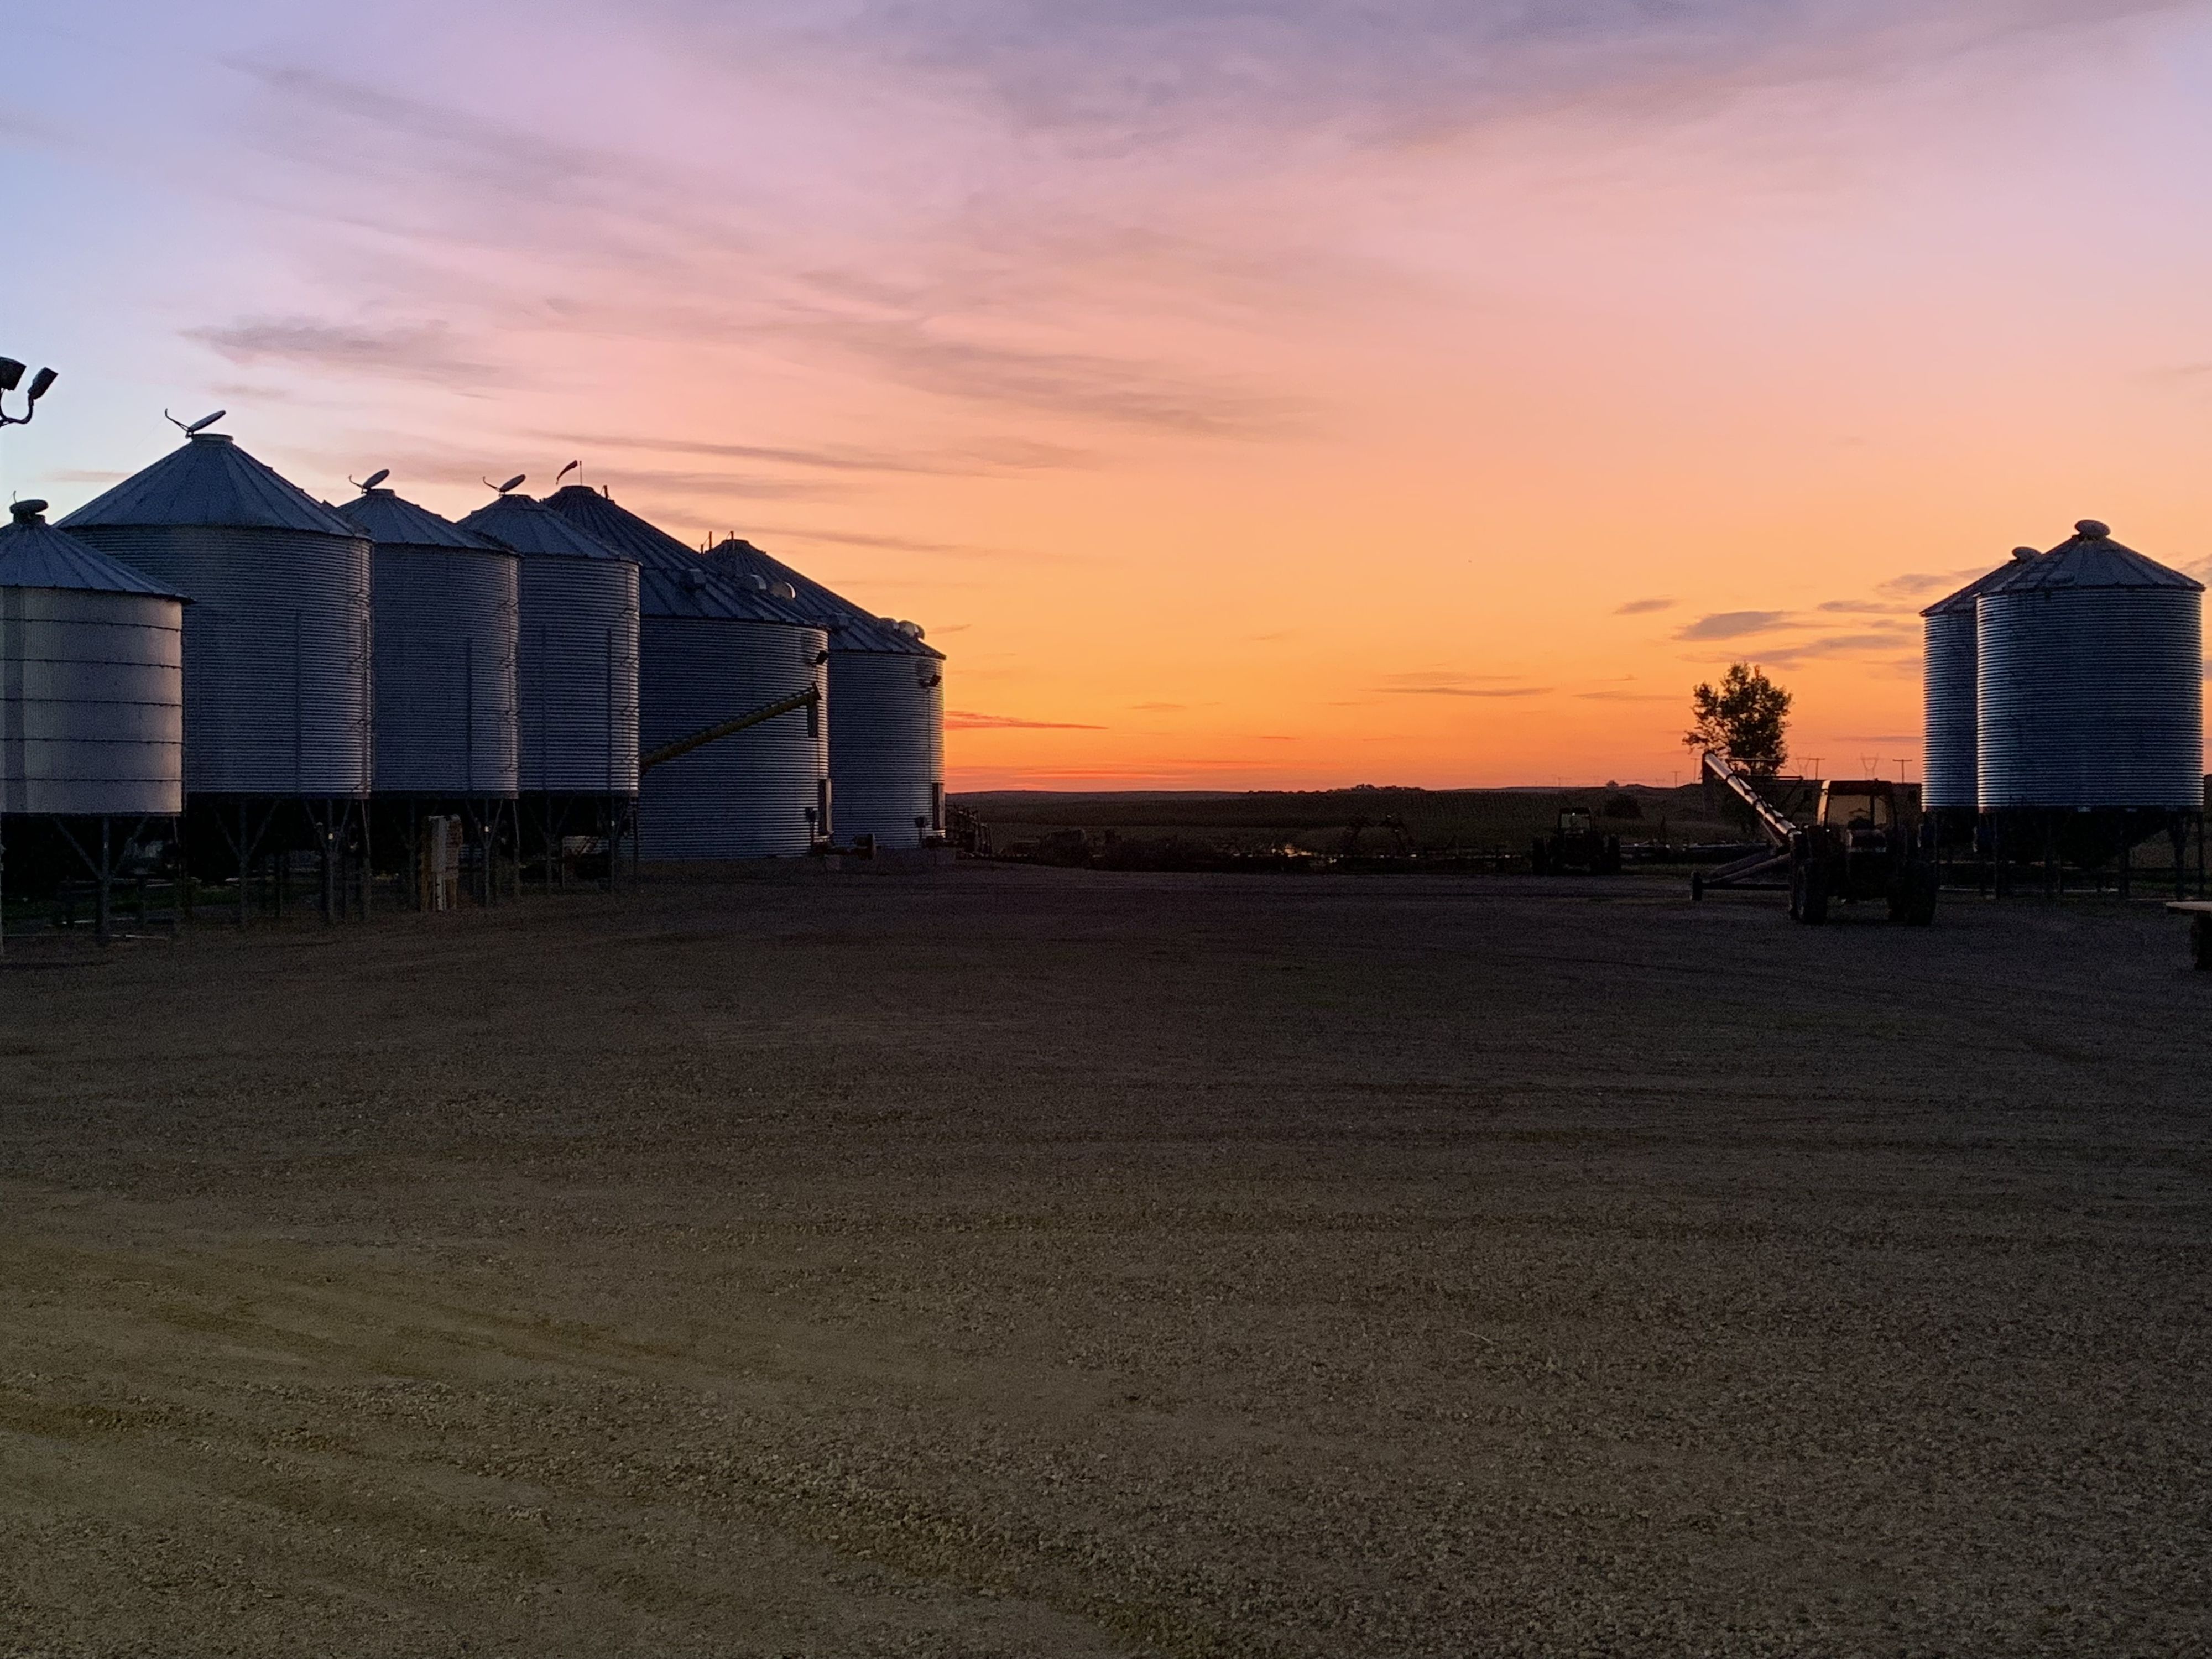 Afternoon Ag News, January 24, 2022: One expert offers producers marketing advice